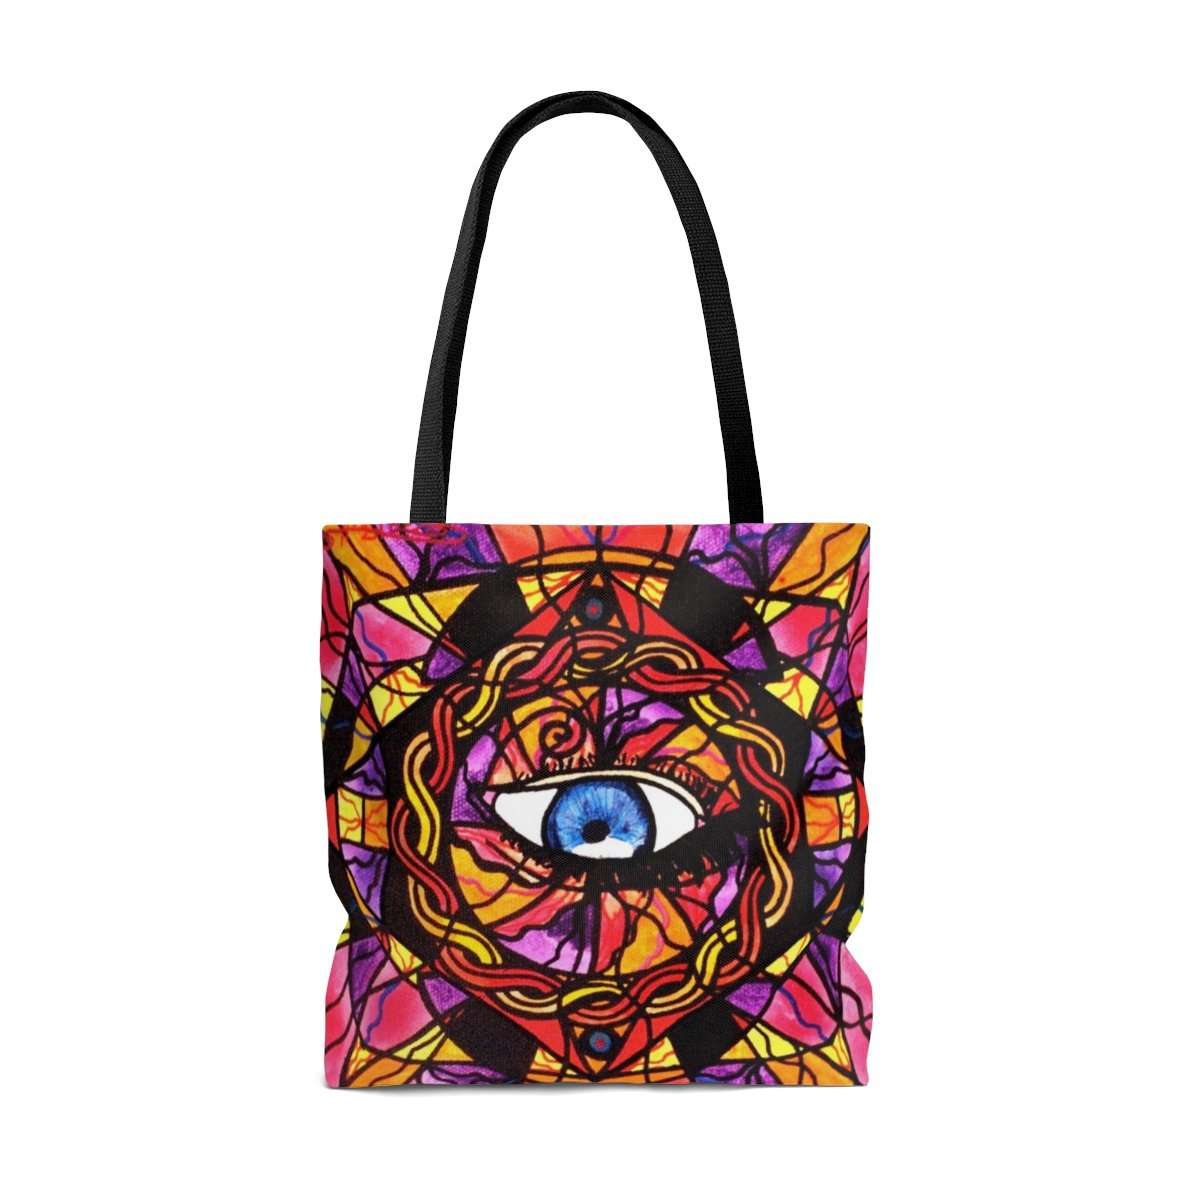 your-one-stop-shop-for-confident-self-expression-aop-tote-bag-sale_1.jpg